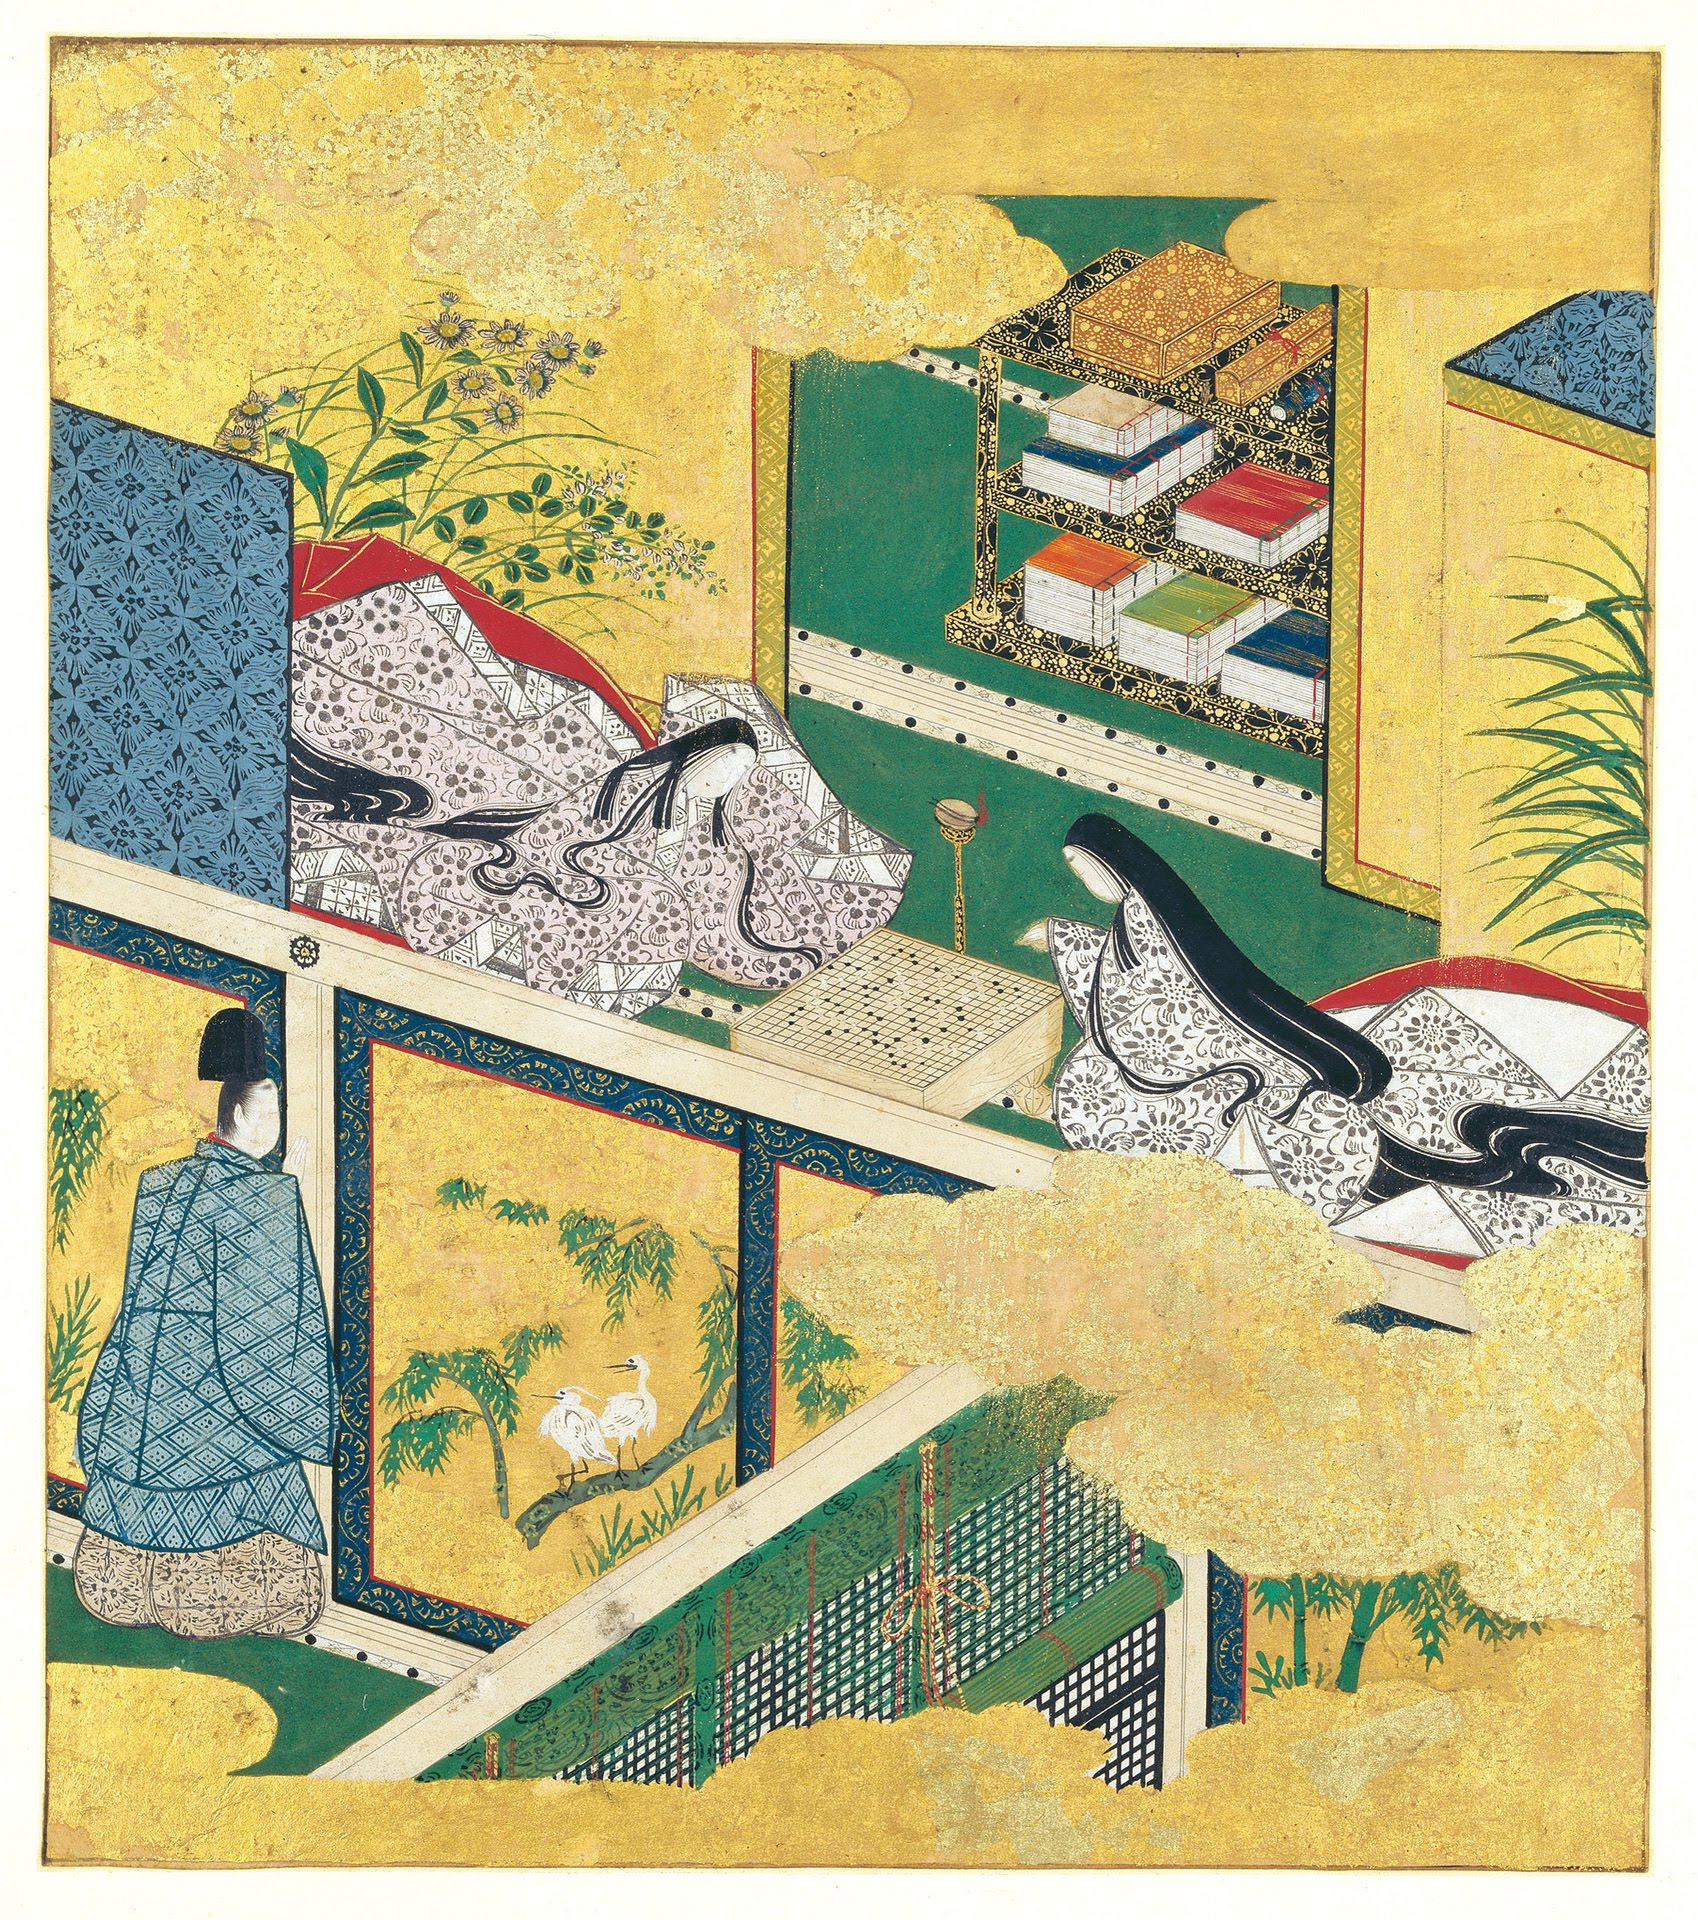 An illustration of the Tale of Genji, depicting several women in Heian-style robes inside a palace. They are playing go, with a bookshelf full of Japanese books and scrolls in the background.